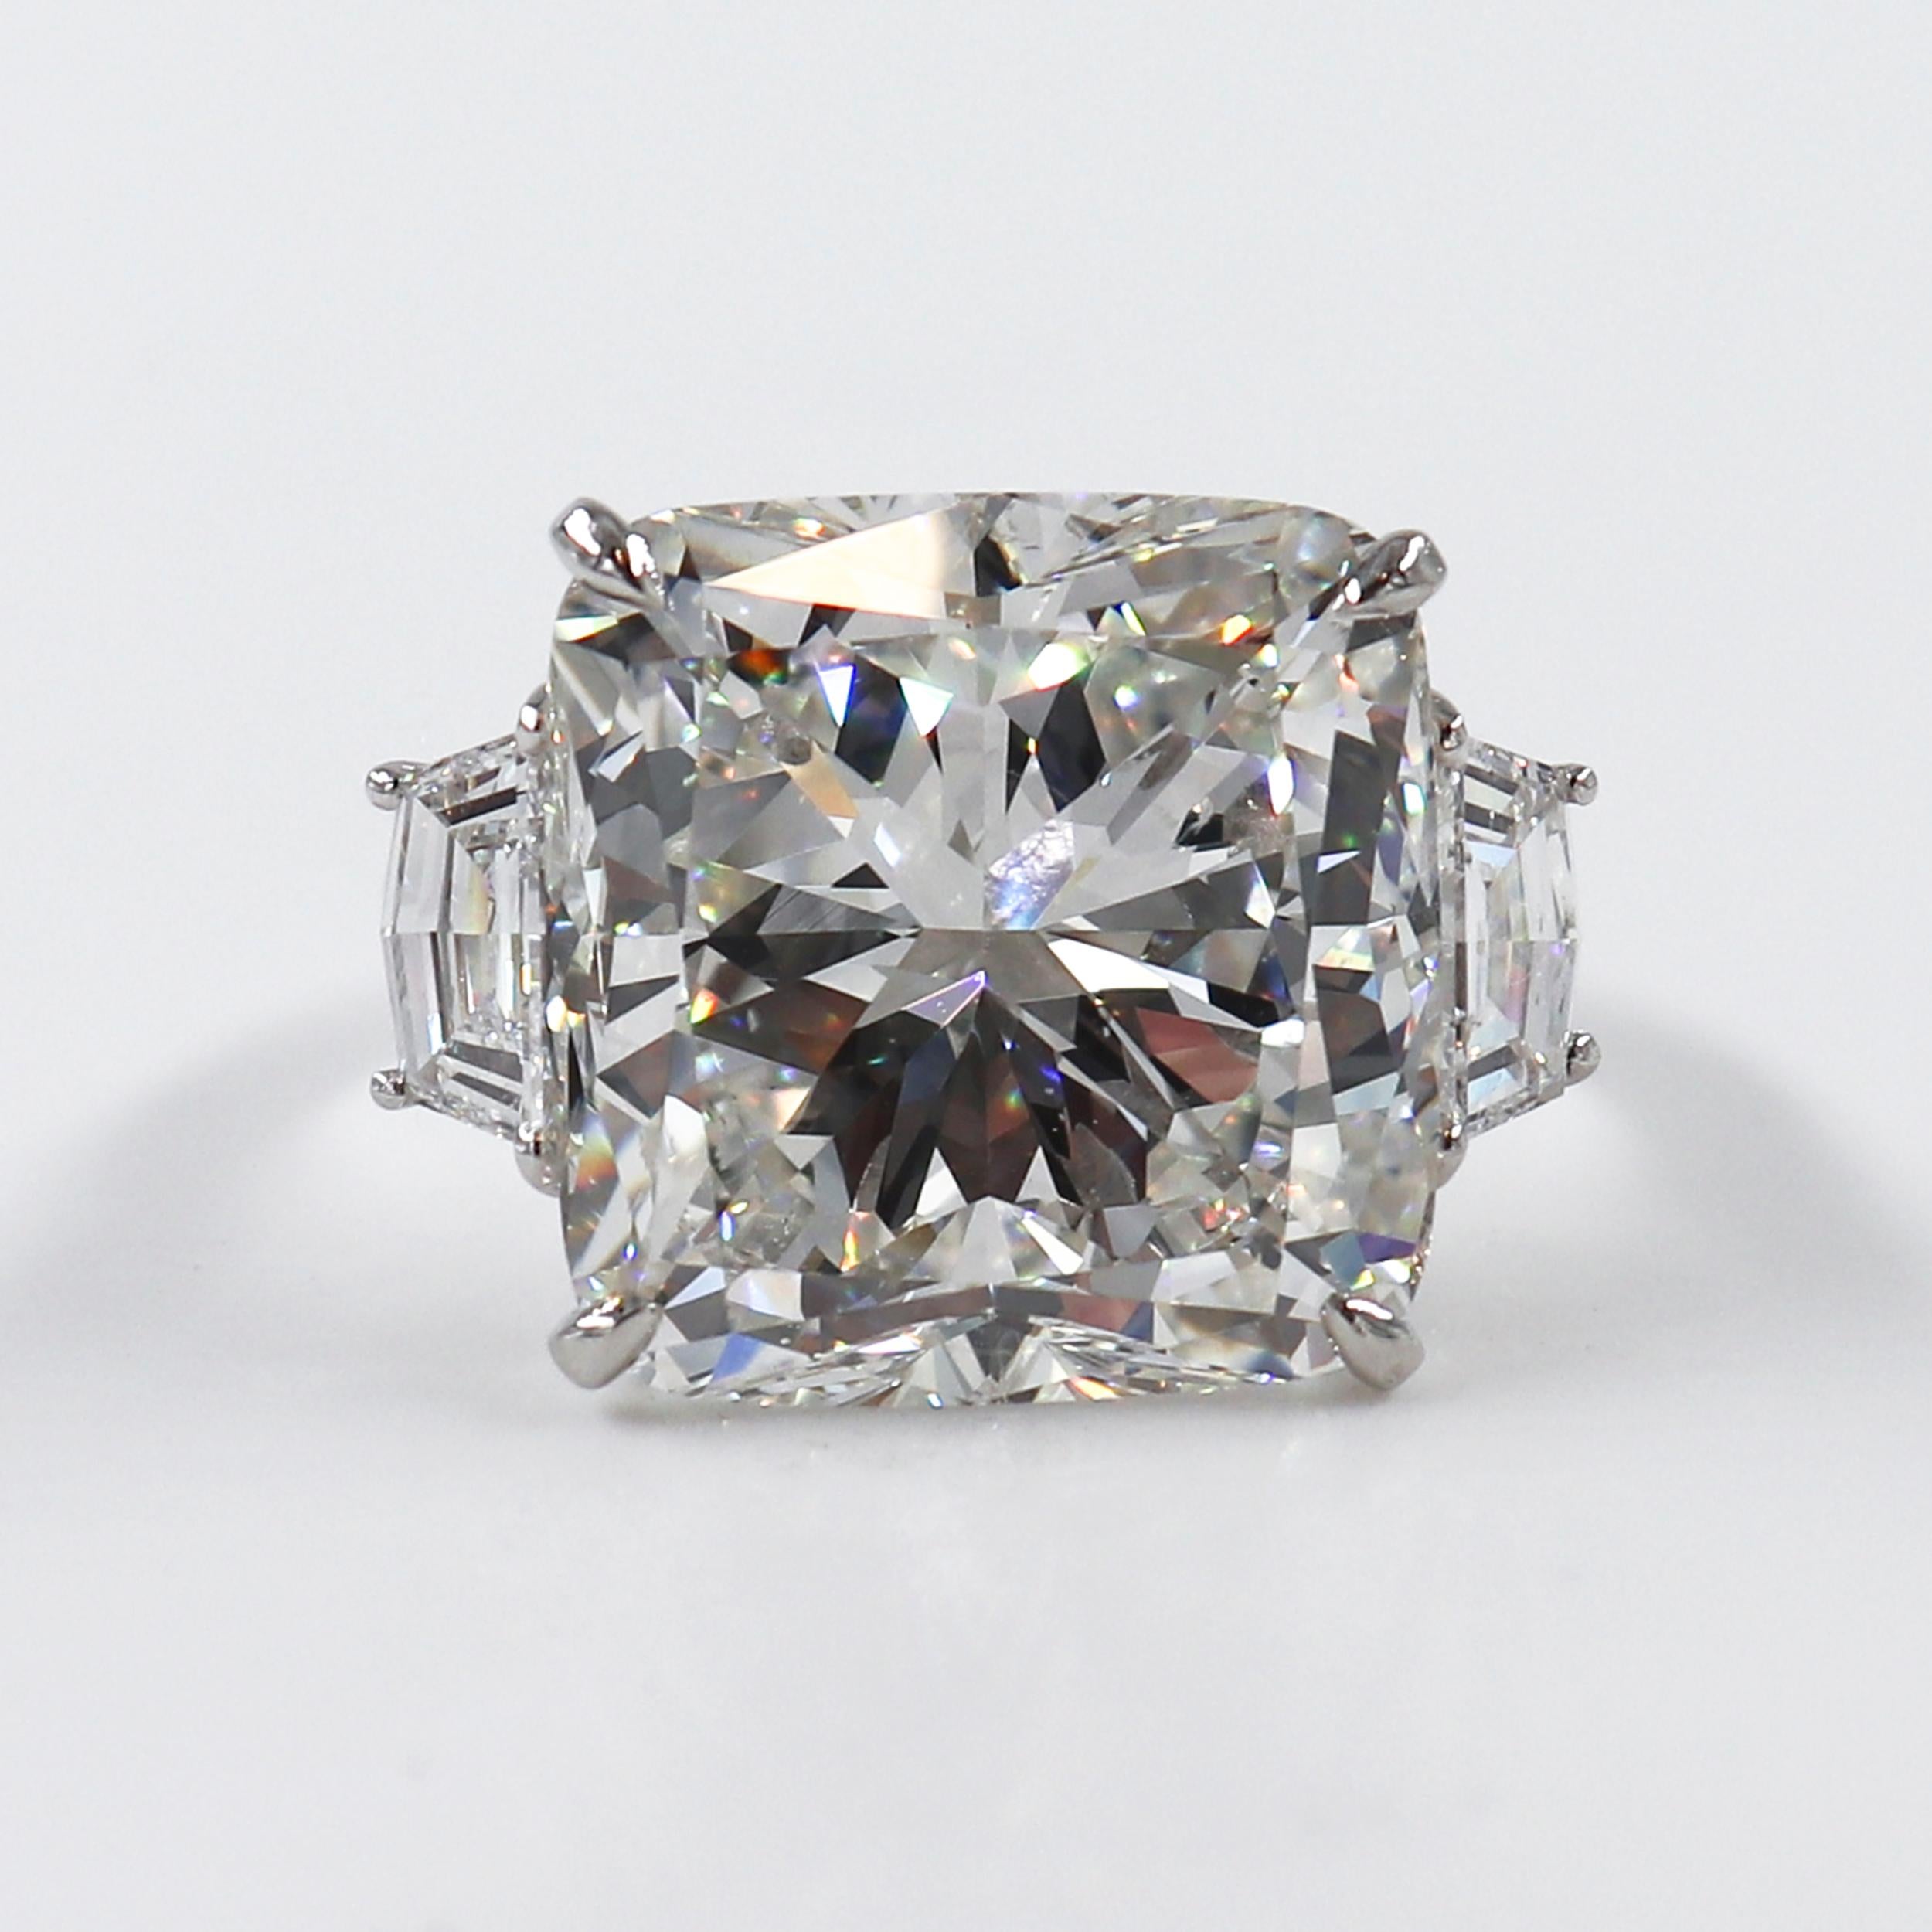 This J. Birnbach spectacular ring crafted in platinum features a 15.10-carat Cushion diamond with G color and SI1 clarity. The center diamond is accentuated by two epaulettes cut diamonds of approximately 0.90-carat each. 

This ring is a size US